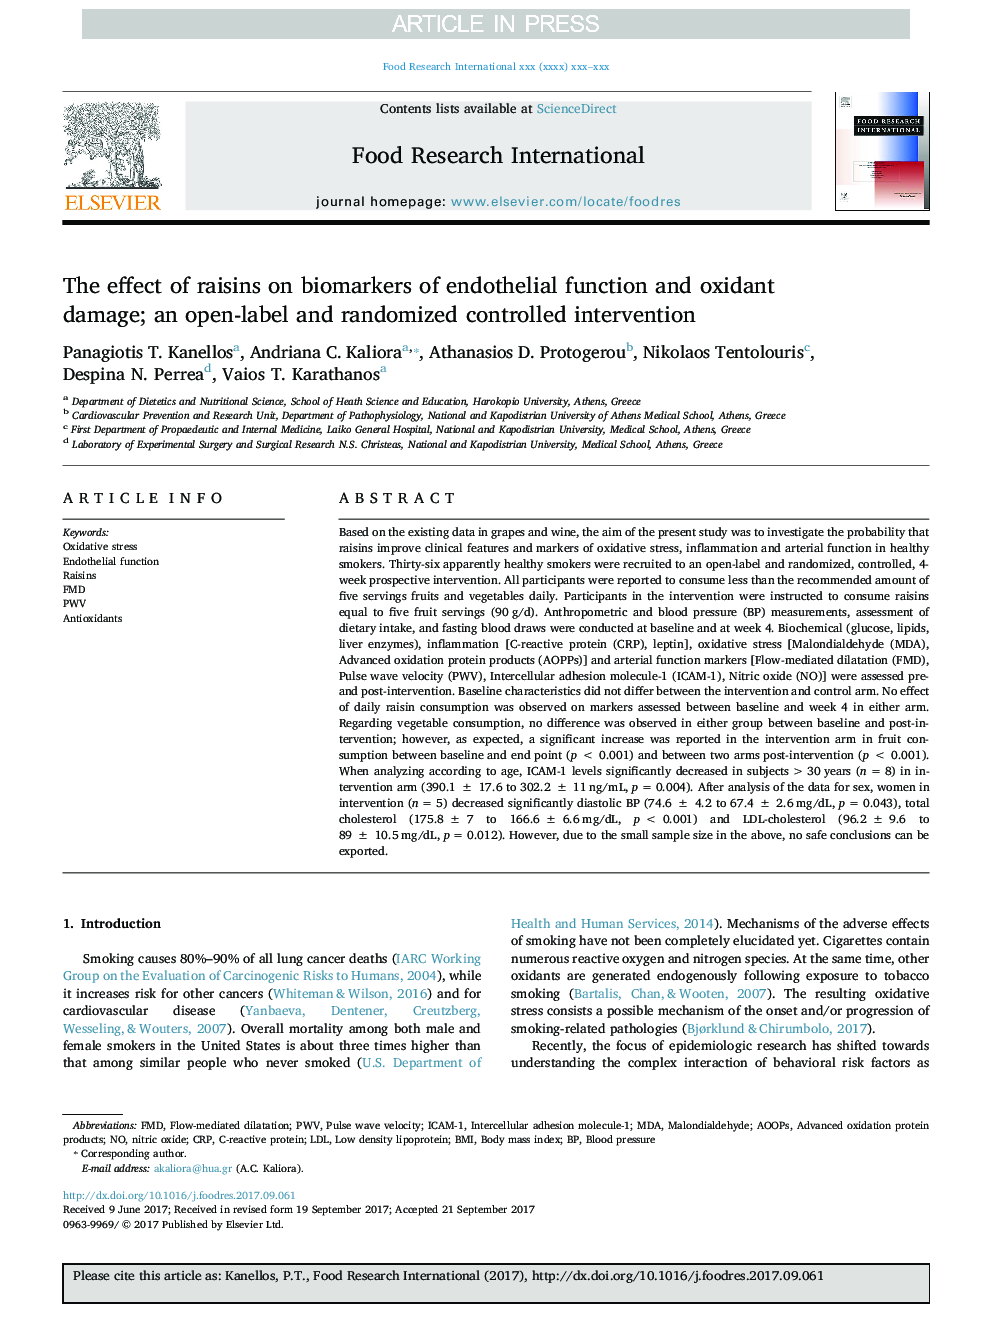 The effect of raisins on biomarkers of endothelial function and oxidant damage; an open-label and randomized controlled intervention